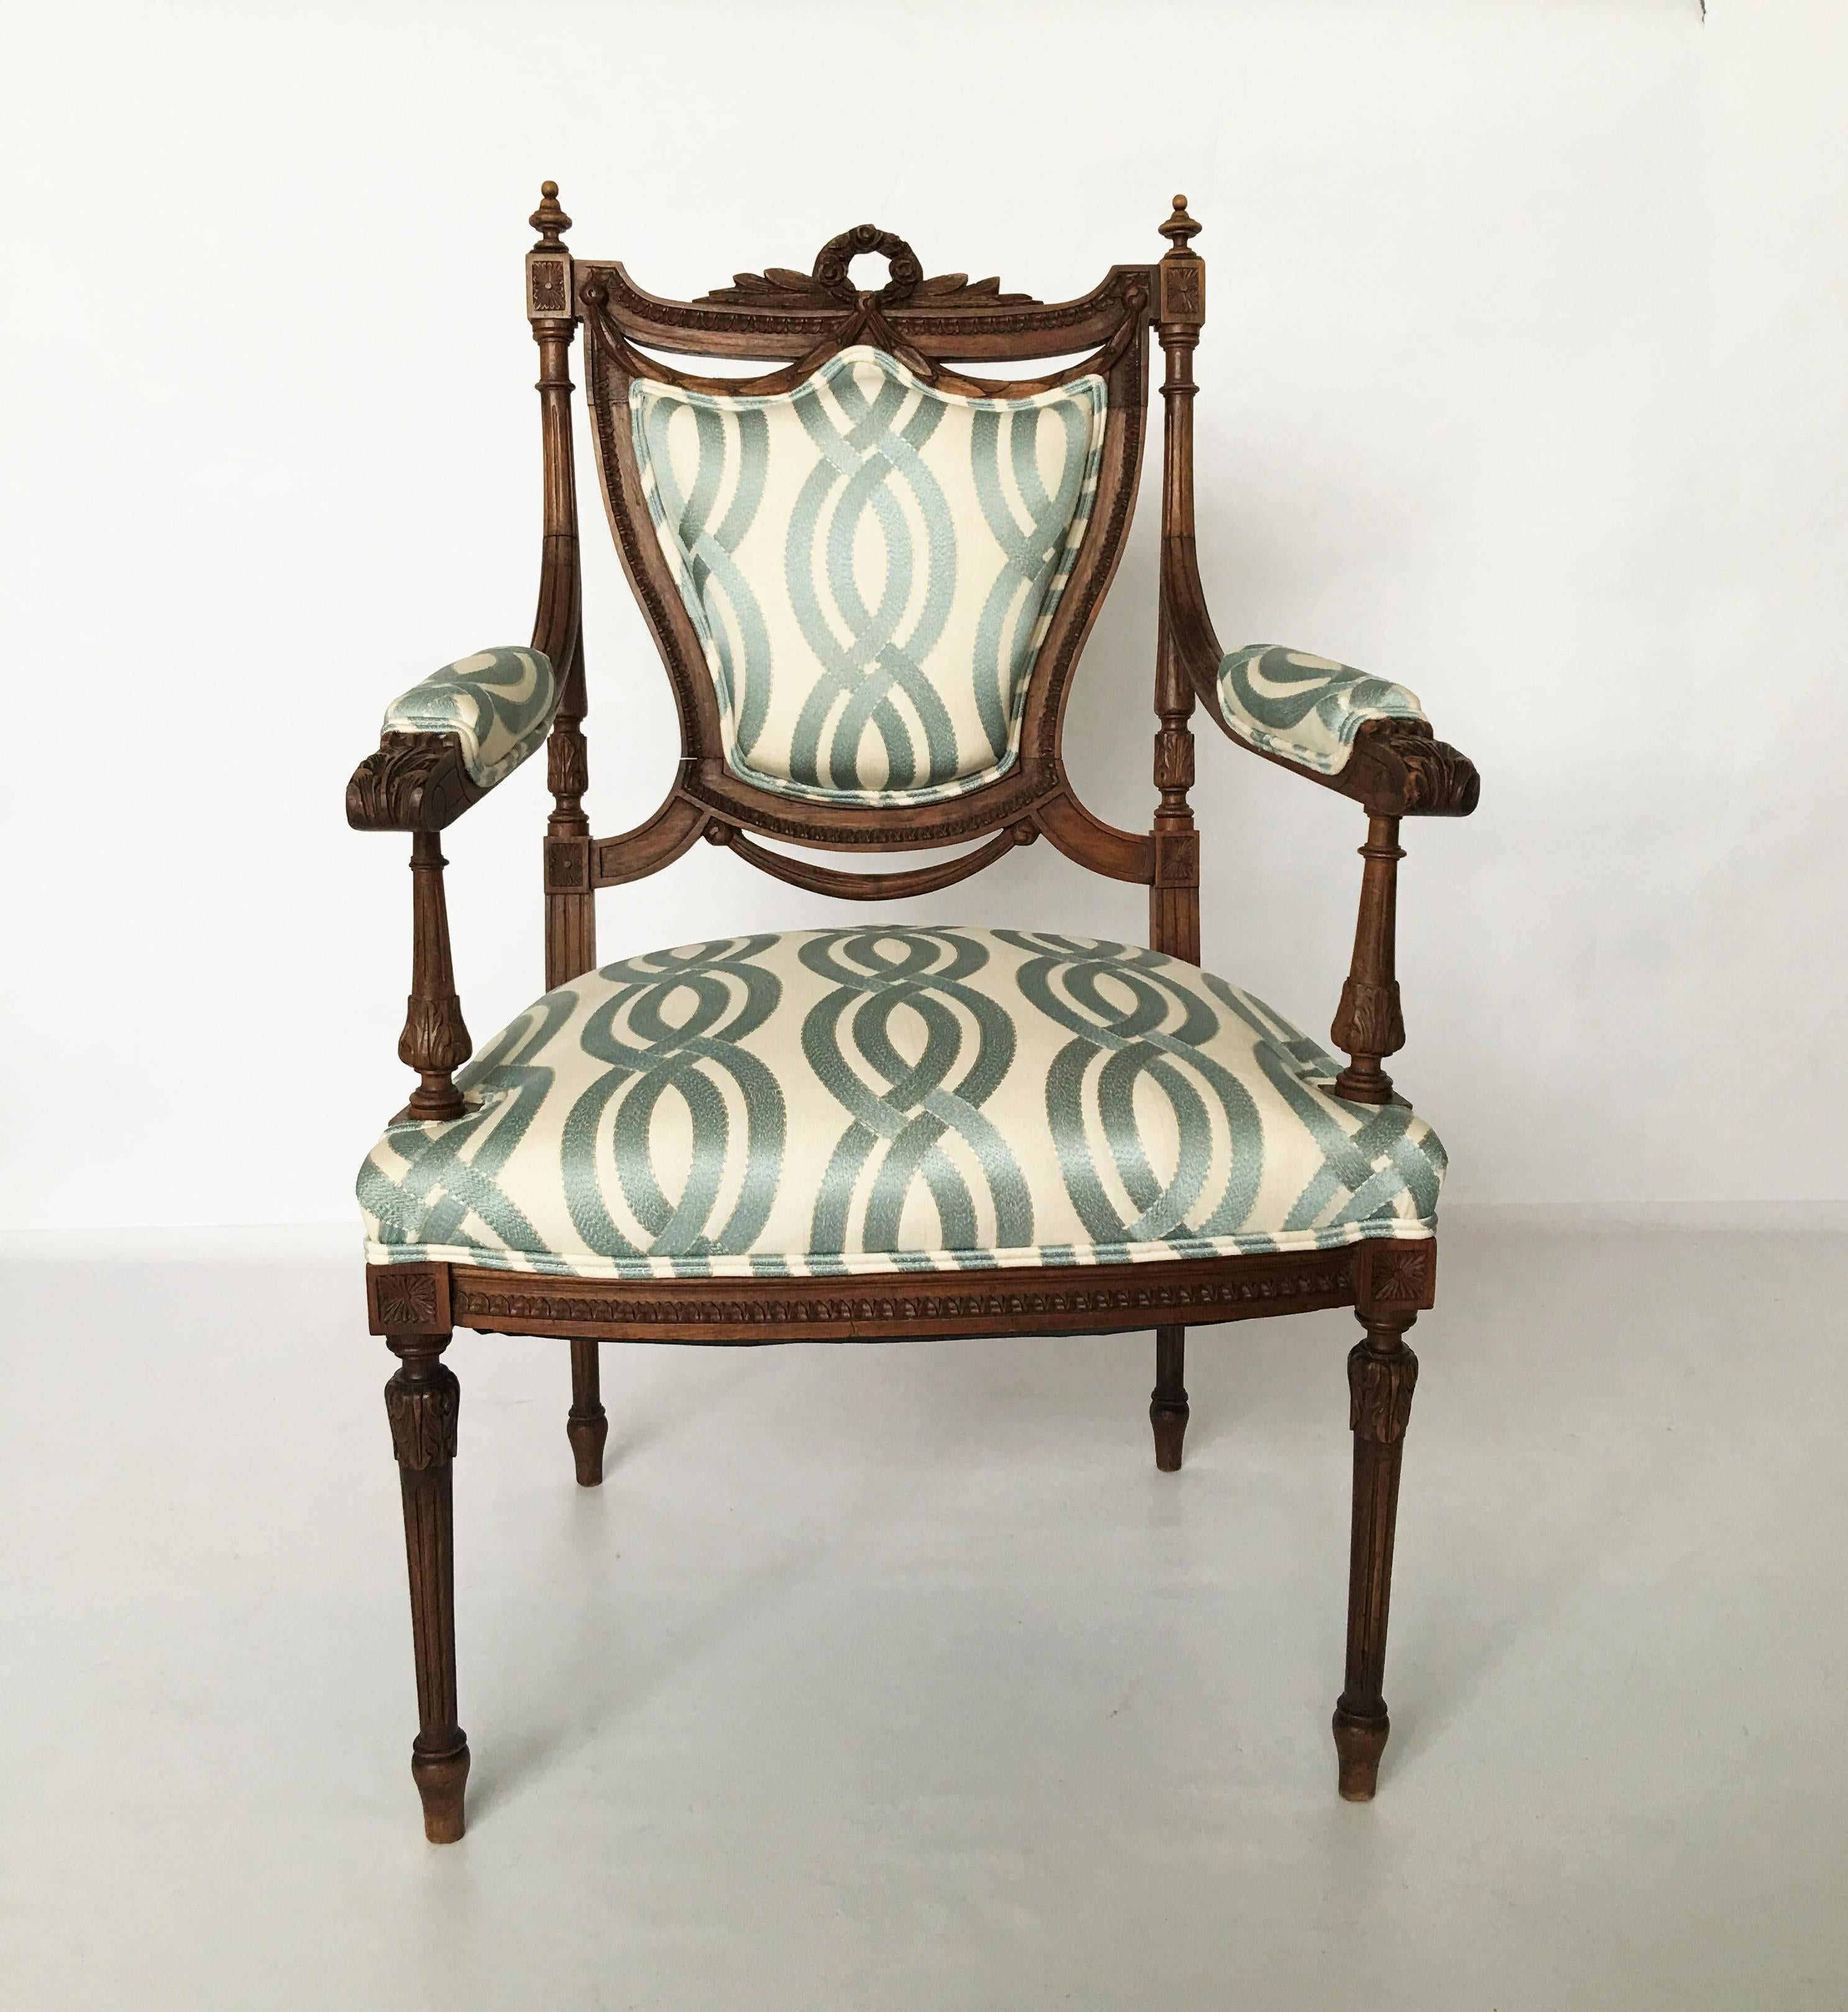 A very fine pair of Louis XVI chairs attributed to Jean Baptiste Claude Sene Parisian Master Carpenter. Recently upholstered.